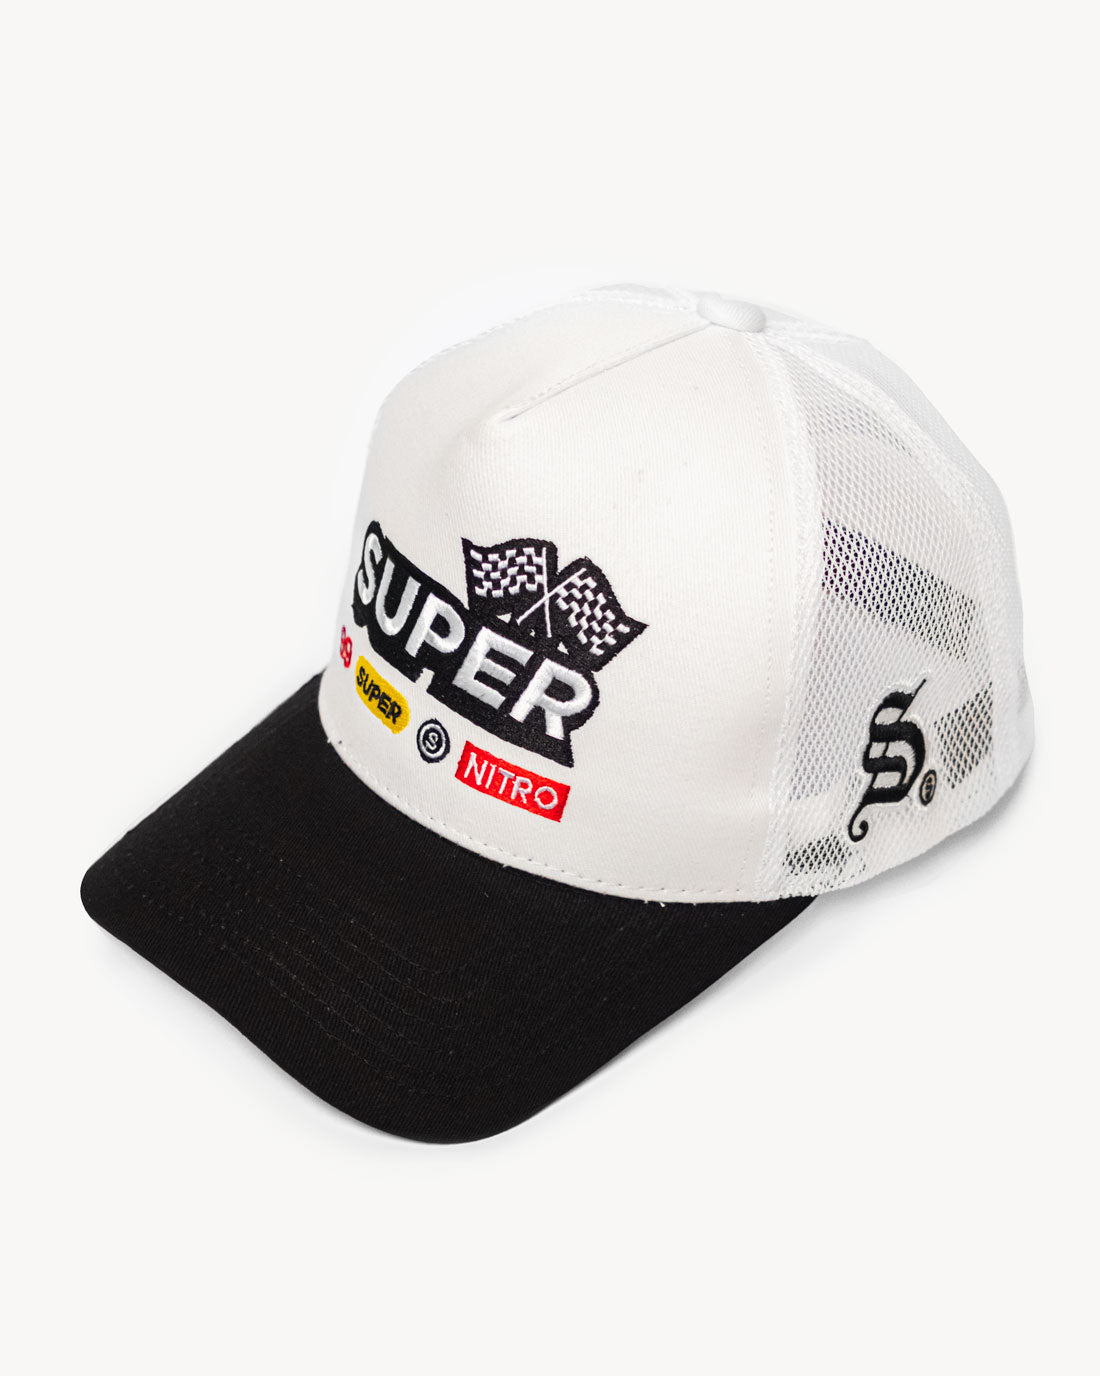 Front view of a two-tone black and white snapback hat with stylish racing-inspired embroidered design and cooling mesh back.